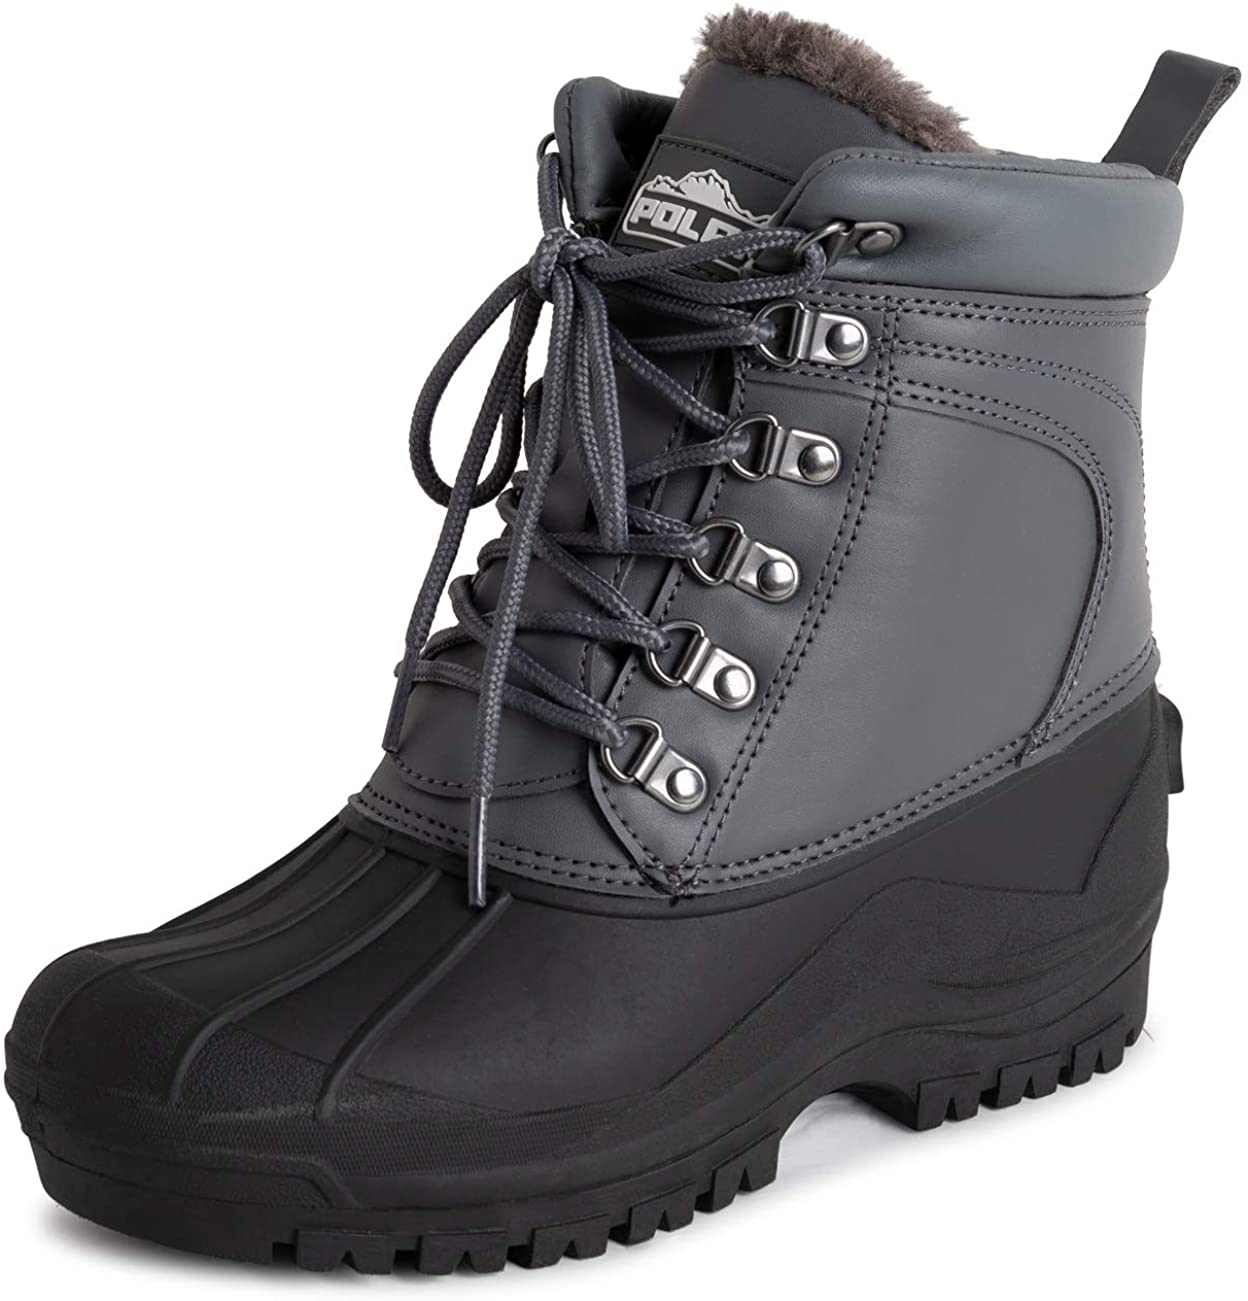 Mens Muck Lace Up Short Nylon Winter Snow Rain Lace Up Waterproof Duck Boots